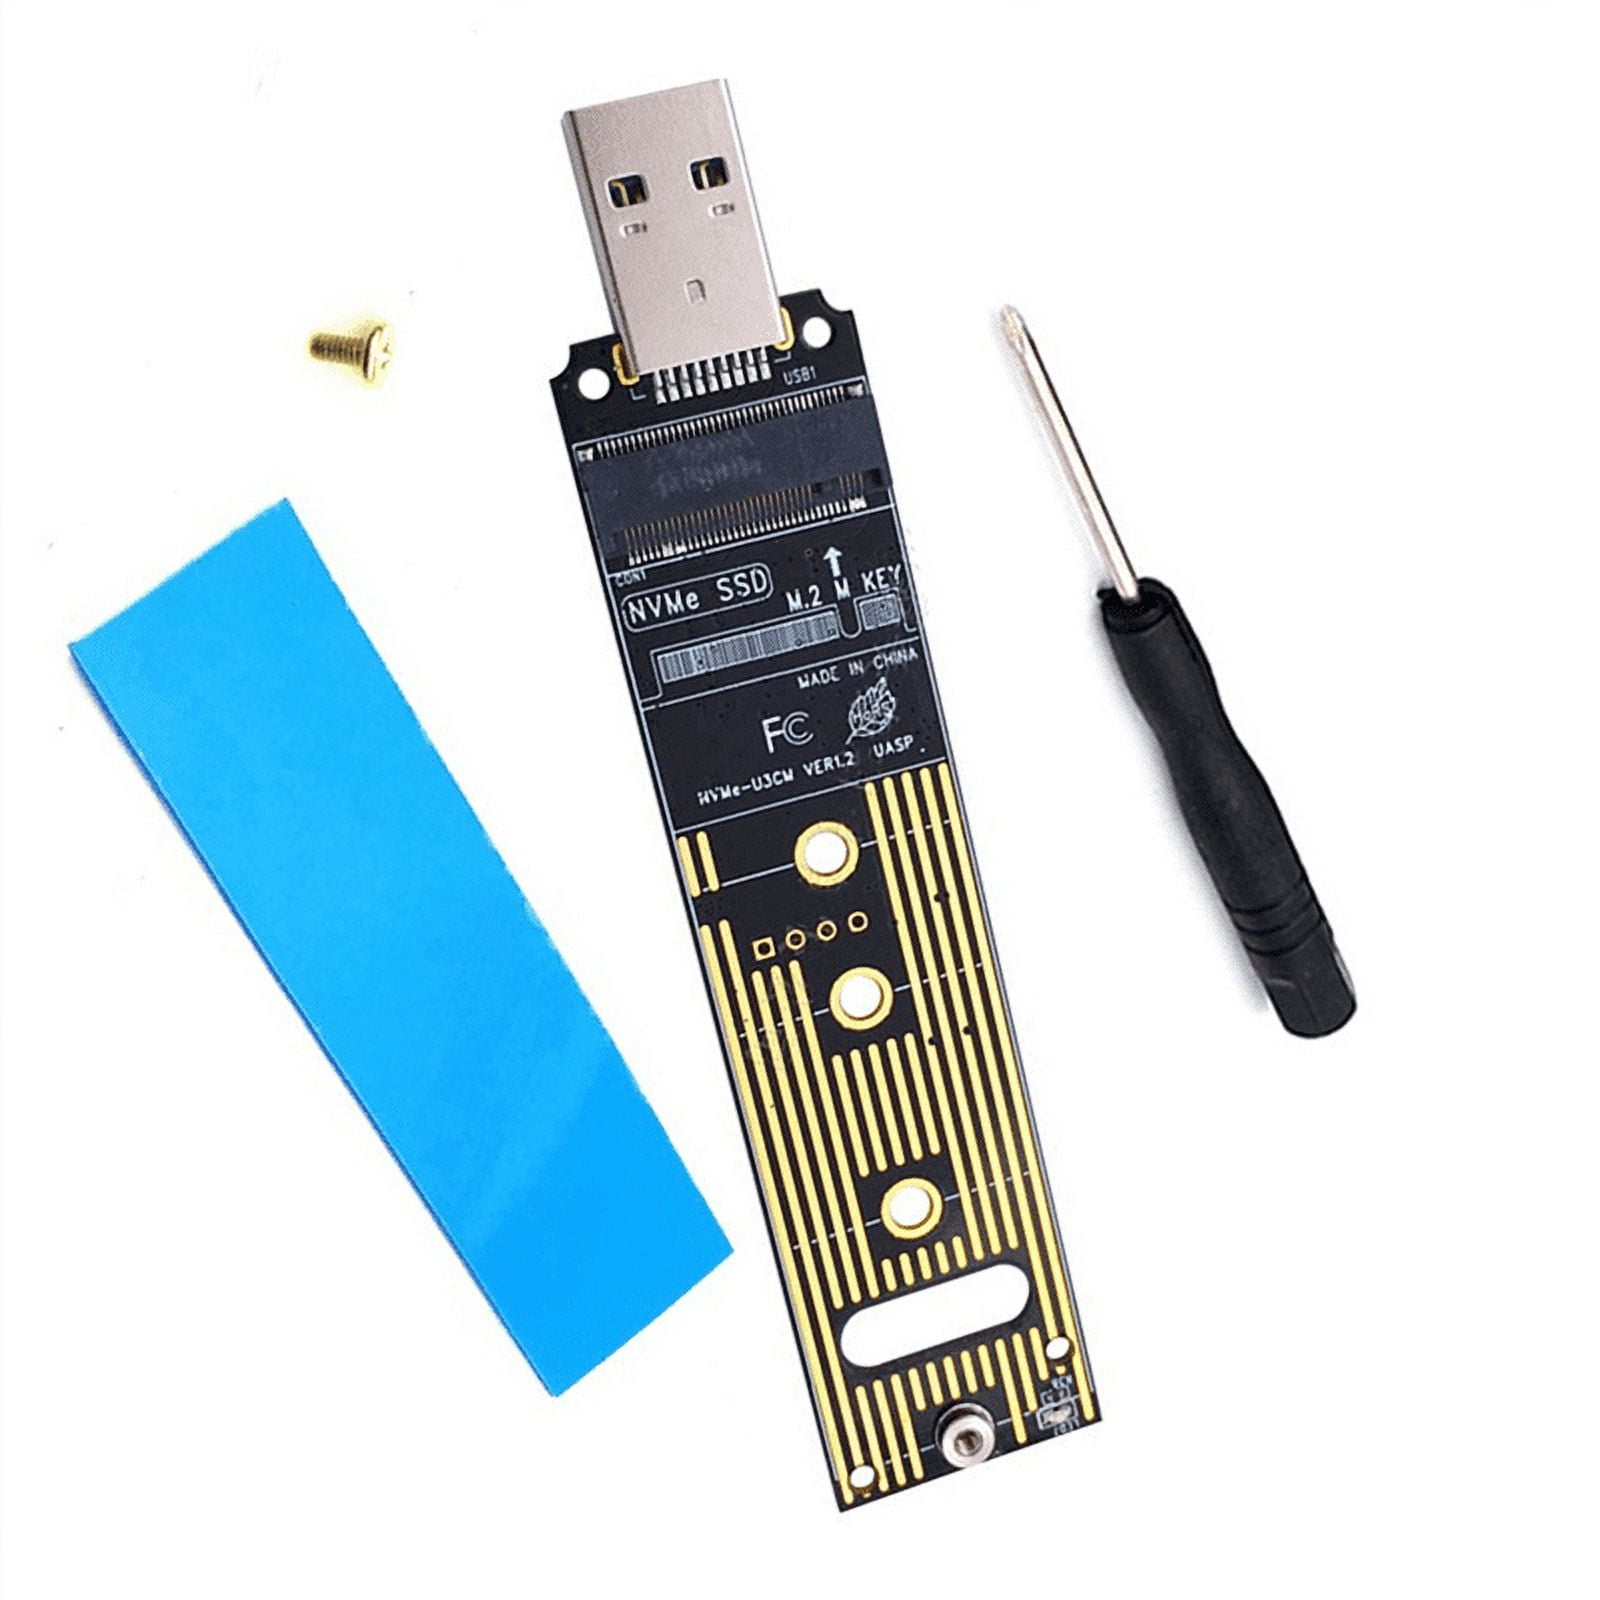 M.2 To Type-C SSD Adapter M2 To USB3.1 1000Mb/-s Adapter For M.2 NVME  JMS583 Main Control Adapter Card For 2230 M2 SSD M.2 To Type-C SSD Adapter  M2 To